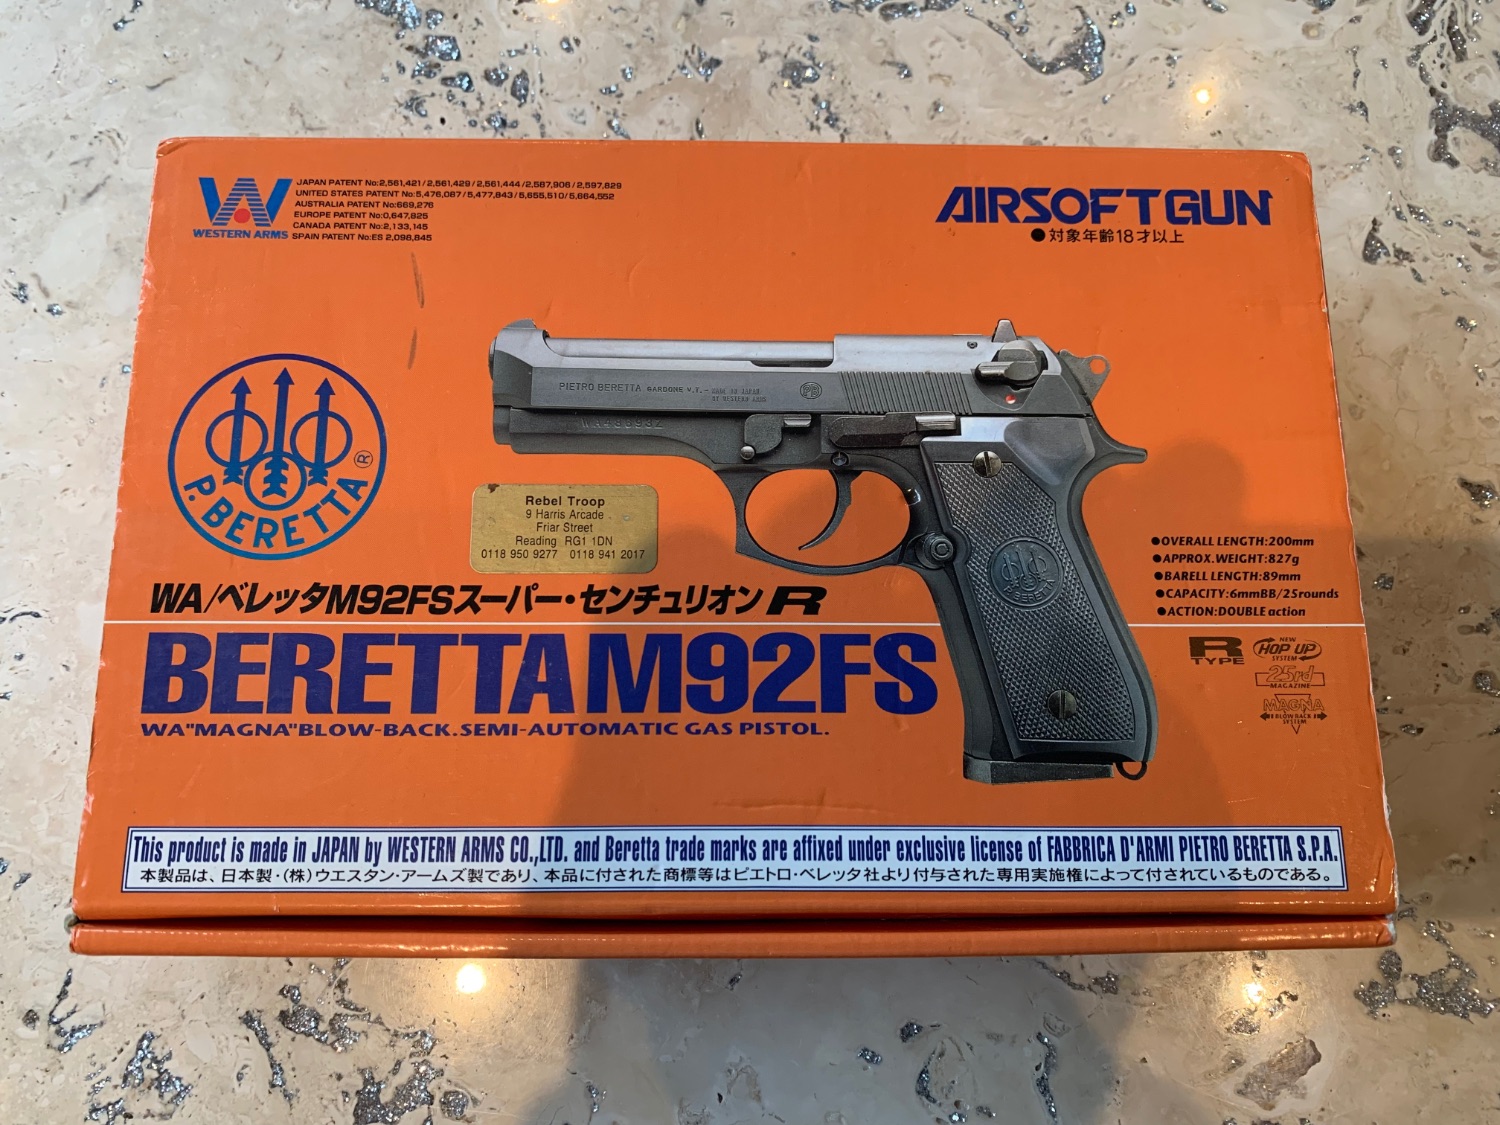 Western Arms Beretta M92FS - Gas Pistols - Airsoft Forums UK